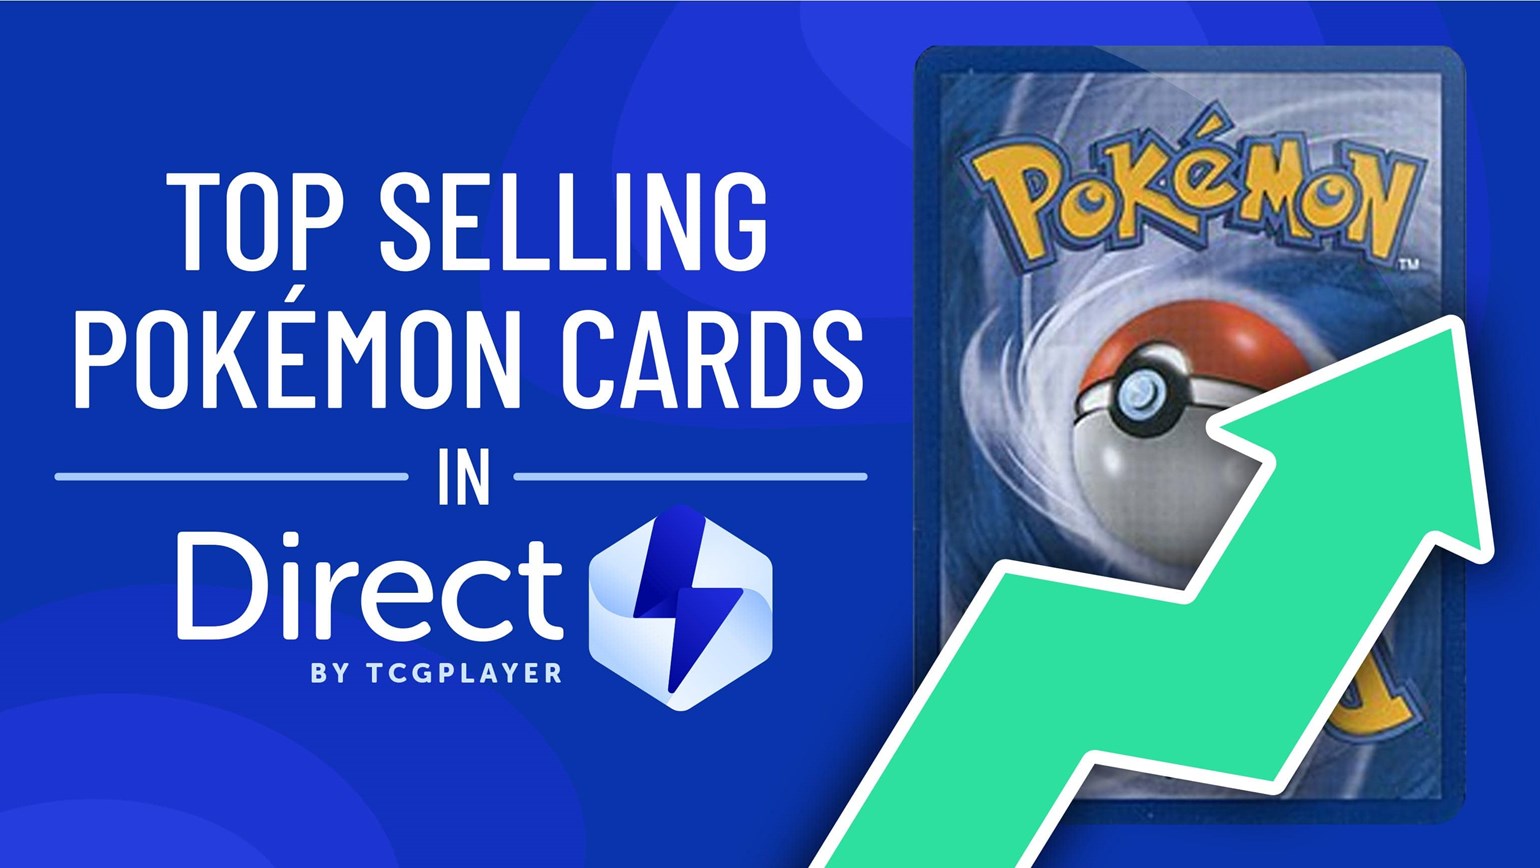 June Top Selling Pokémon Cards in Direct by TCGplayer